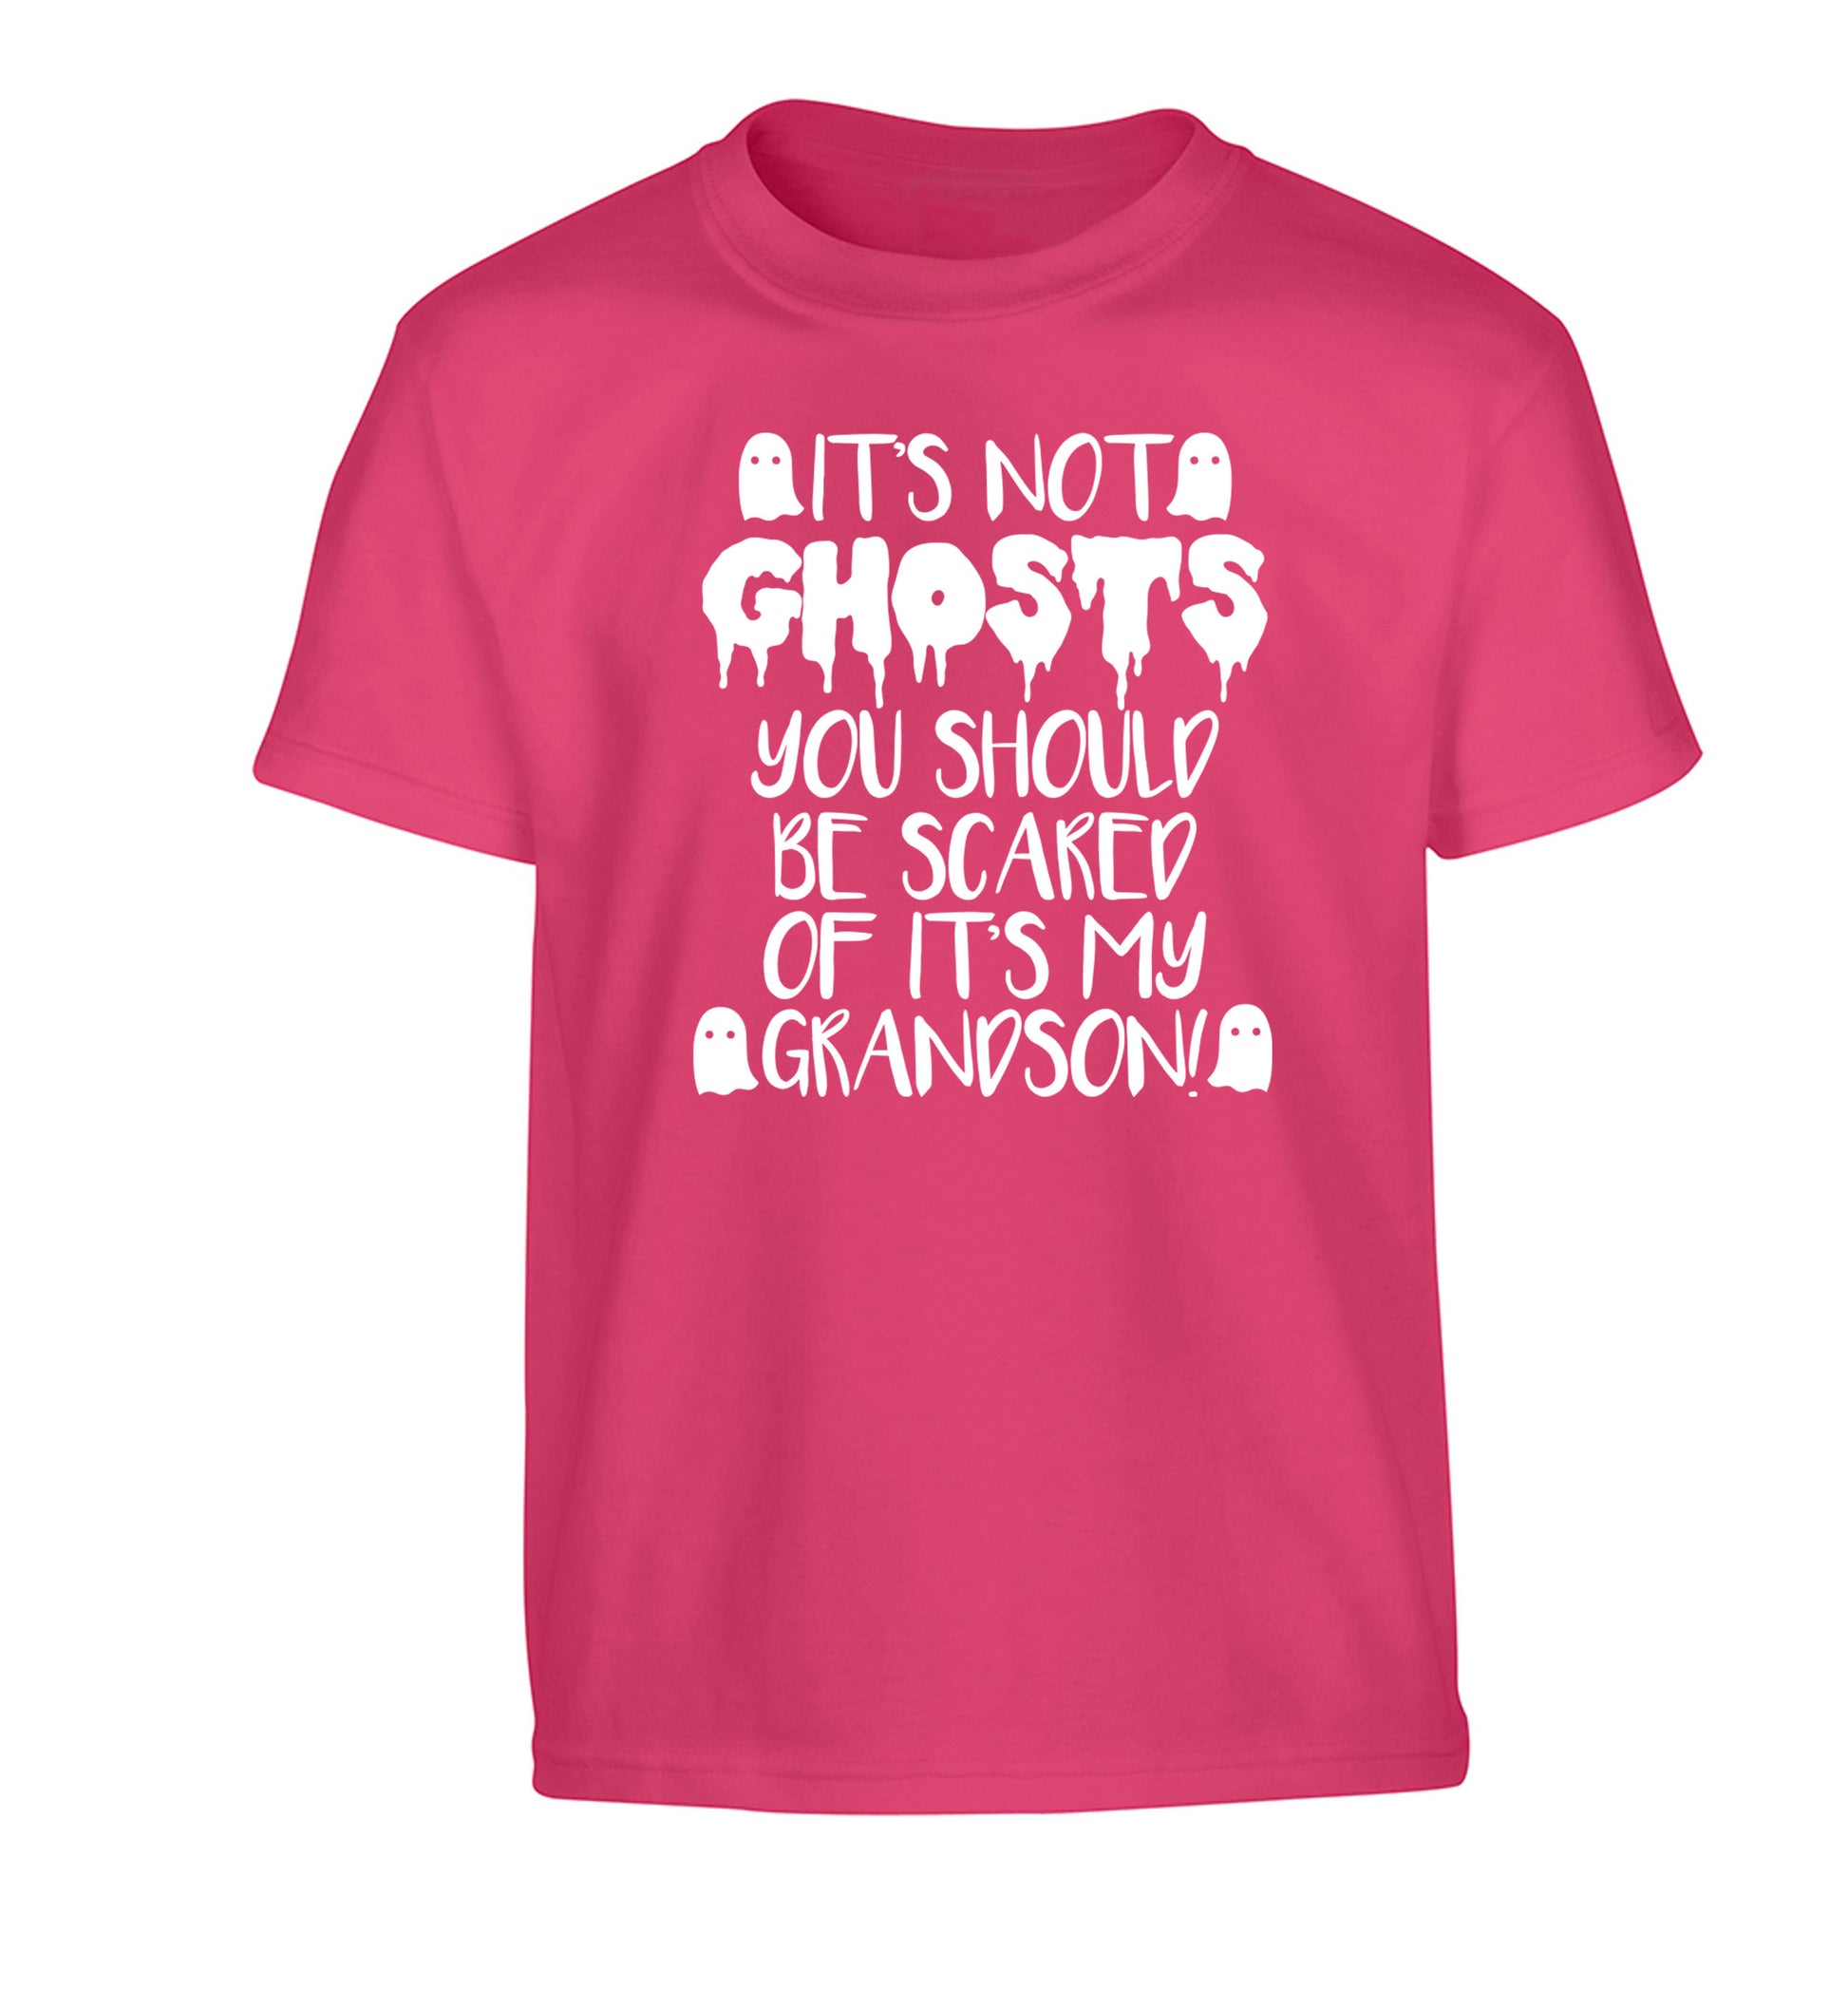 It's not ghosts you should be scared of it's my grandson! Children's pink Tshirt 12-14 Years